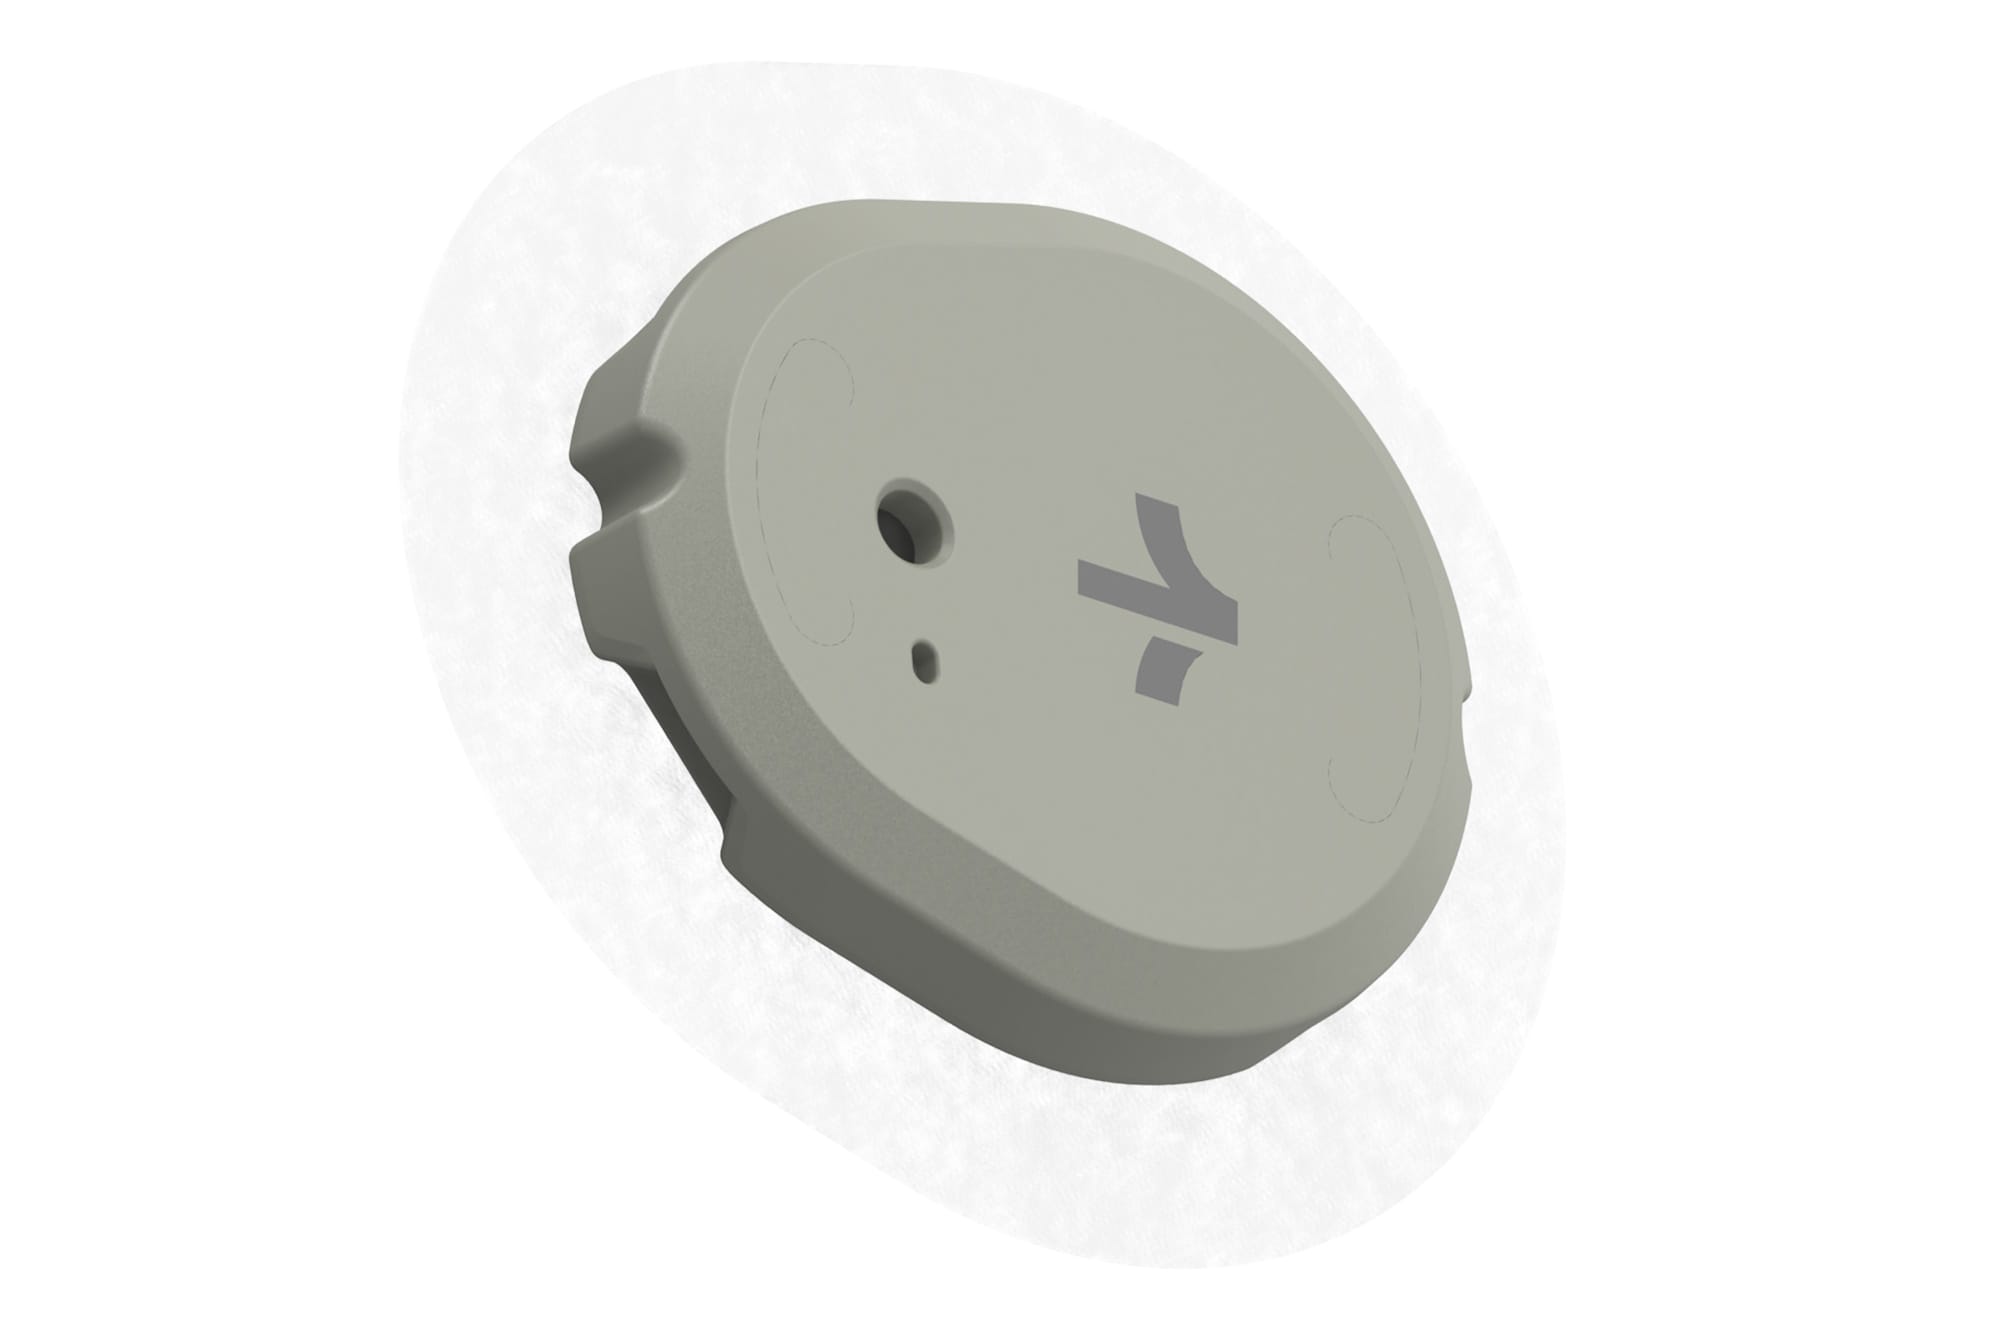 An image of a gray, circular wearable device